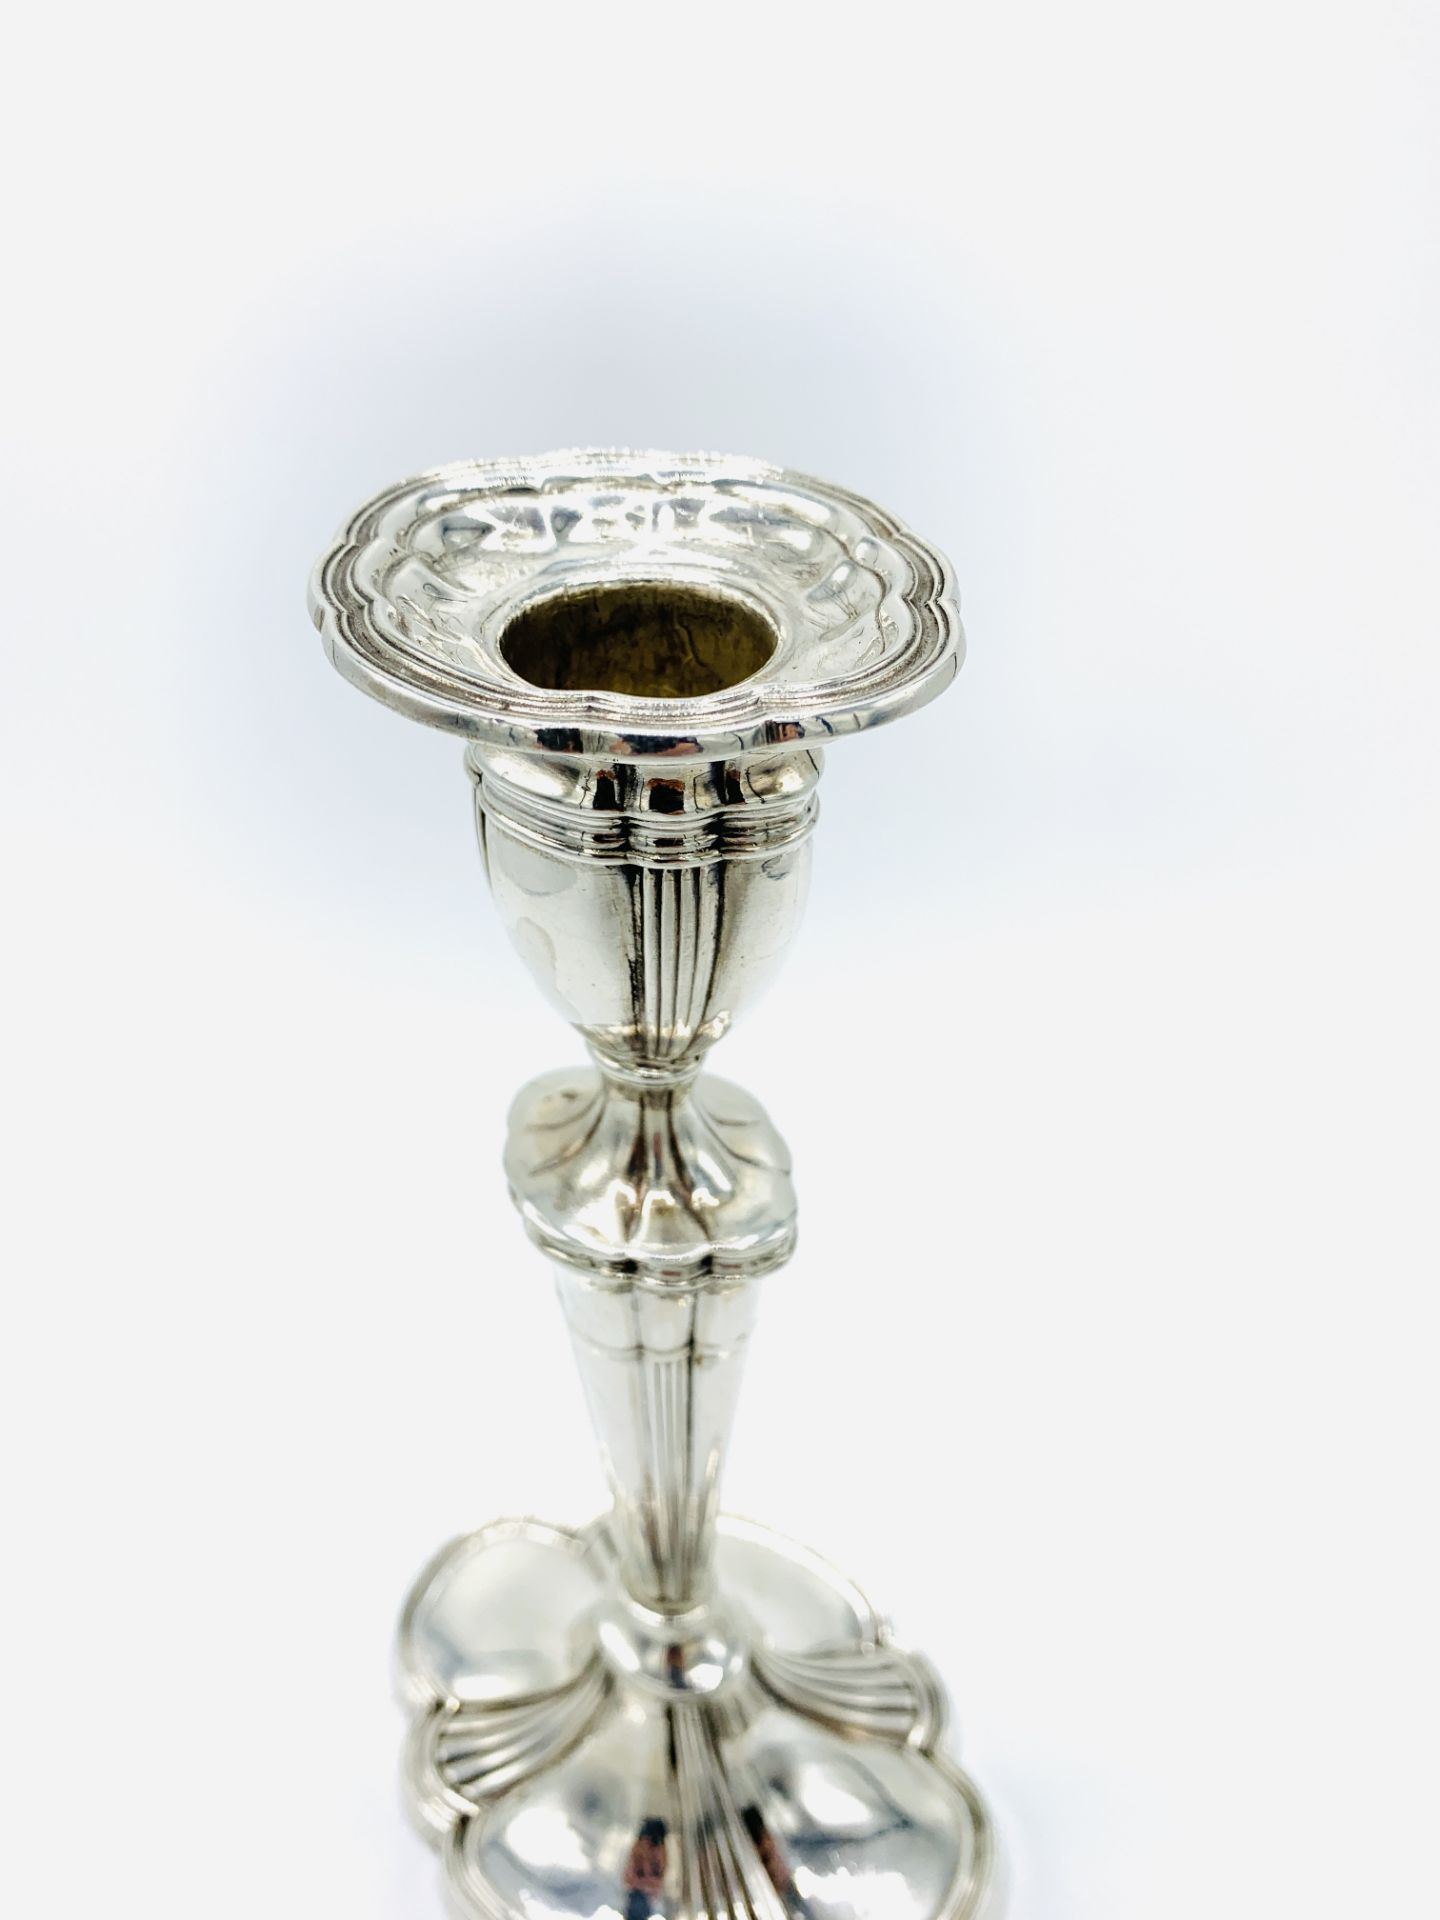 Sterling silver candlestick - Image 4 of 4